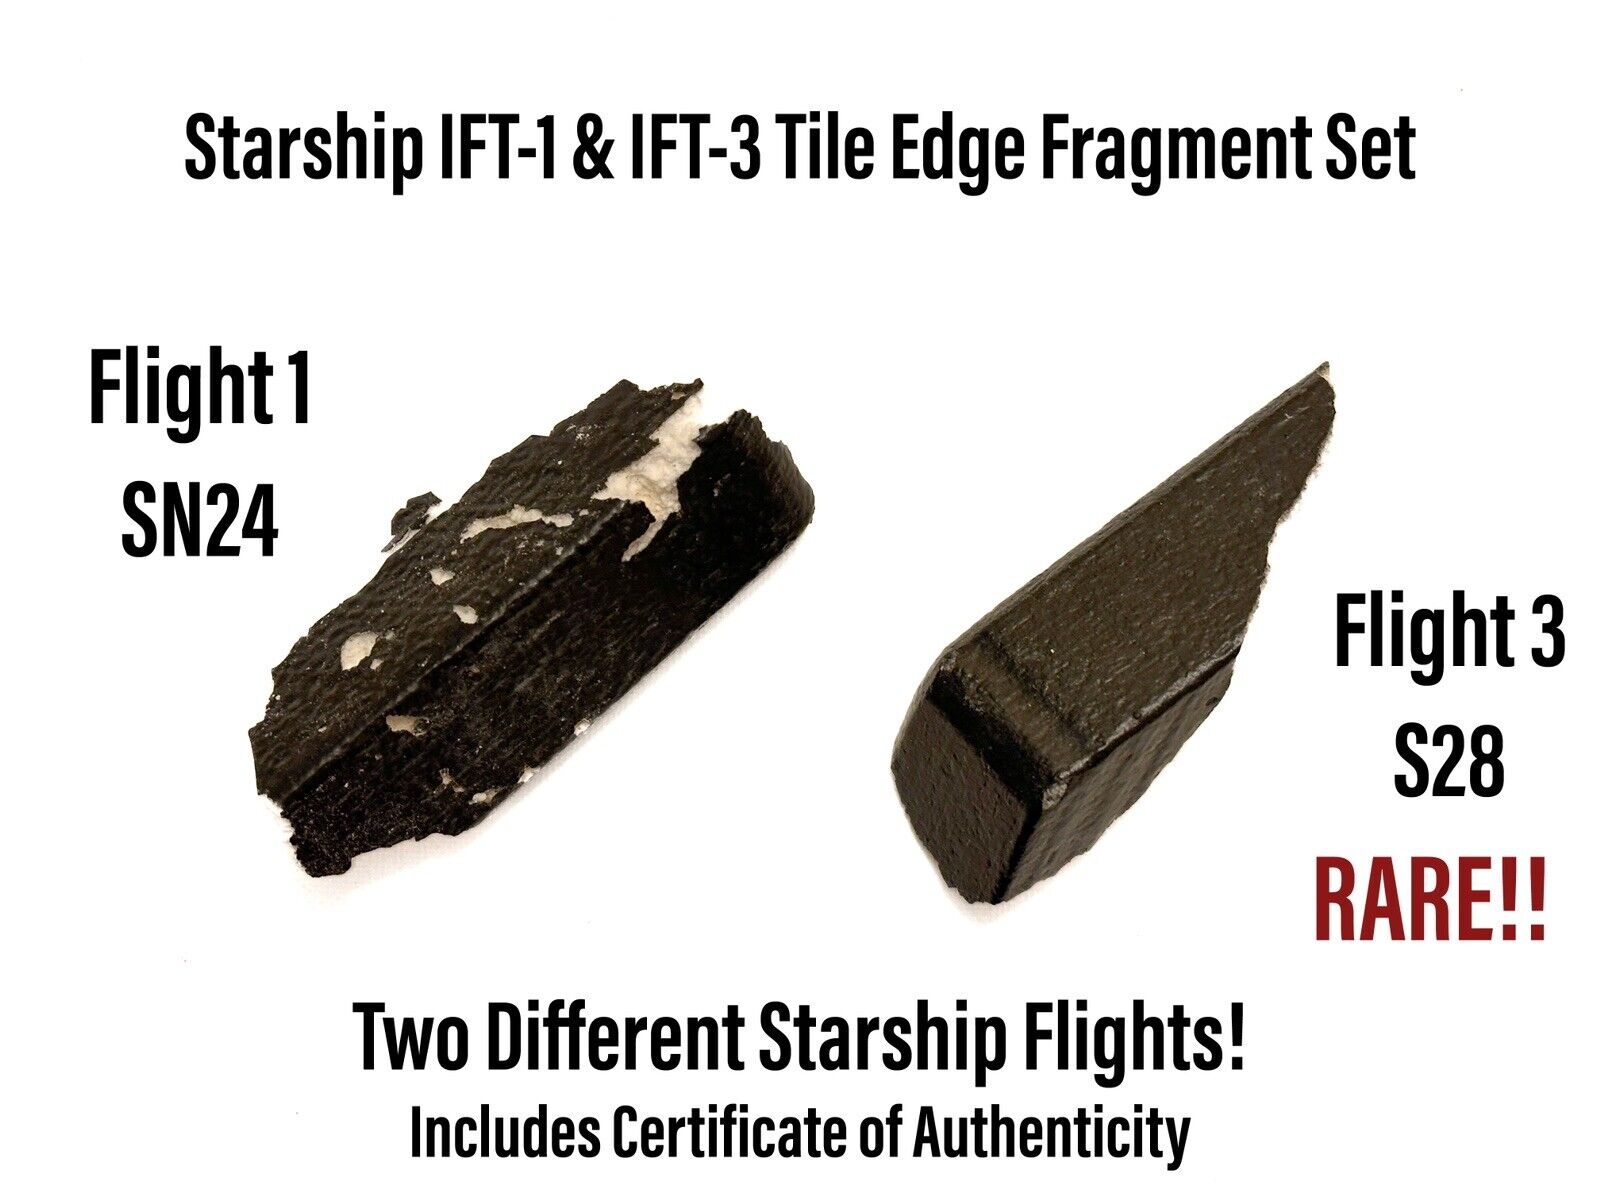 SpaceX Starship SN24 & S28 Heat Shield Tile Fragments Set  RARE IFT-1 & IFT-3